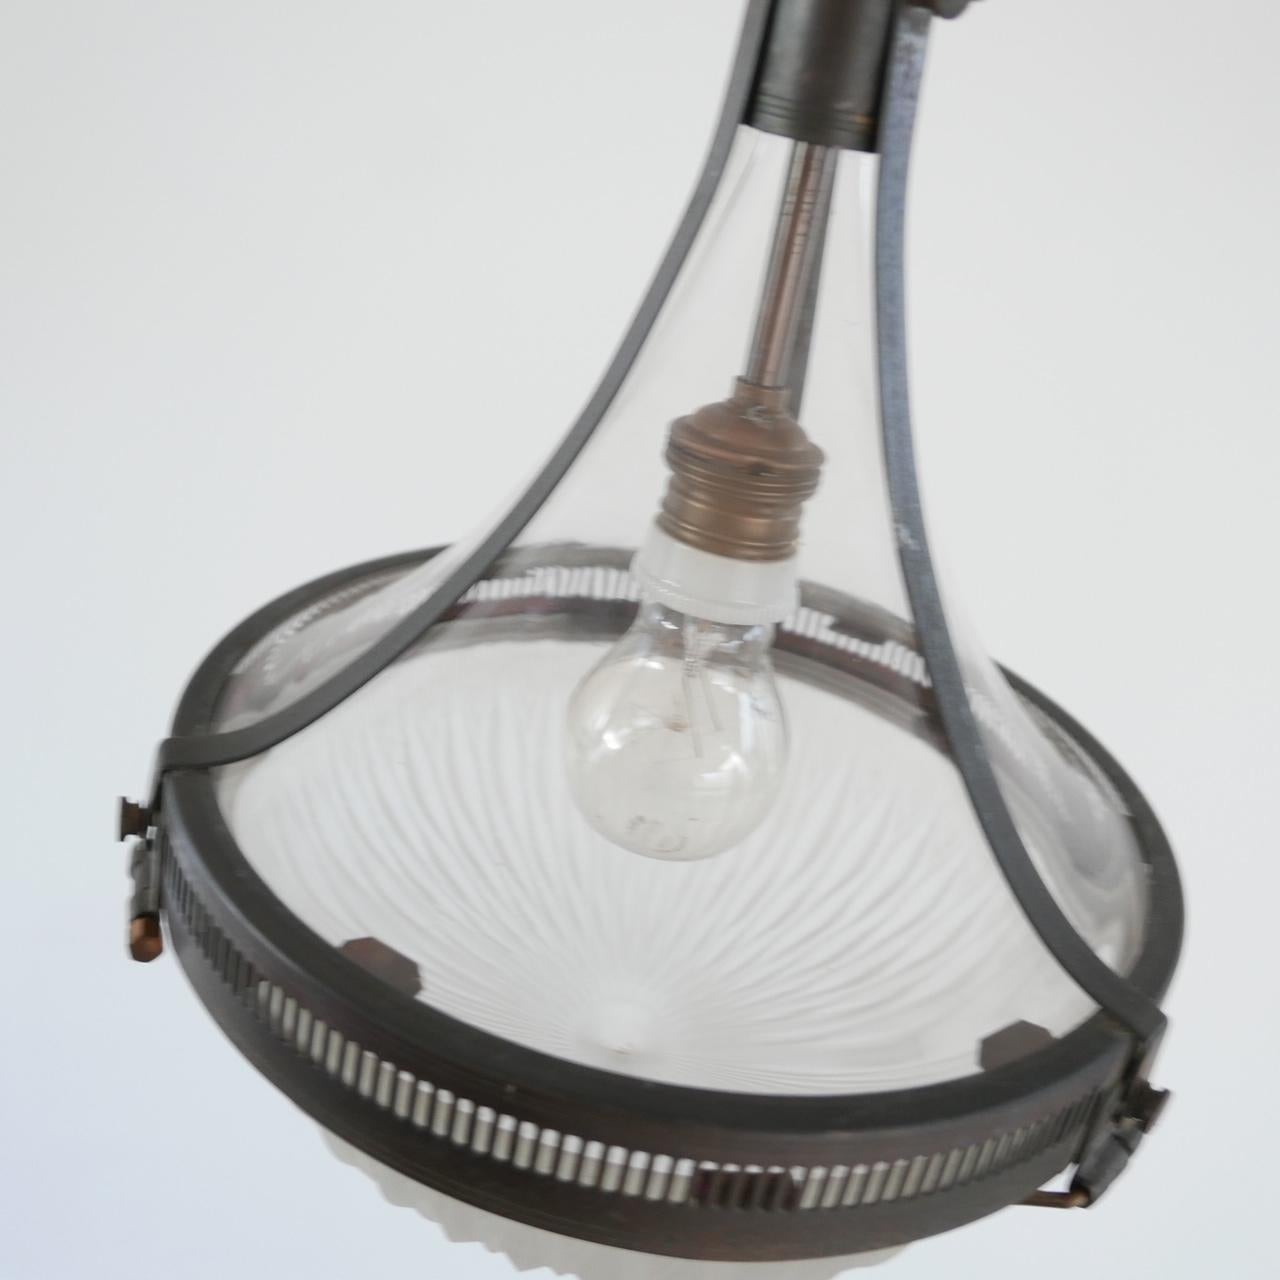 An incredibly rare model early 20th century pendant light, likely German.

Unusual clear blown glass top, with a cut glass etched bottom encased in a bronze gallery. 

Highly decorative and contemporary, originating from circa 1910. 

The only